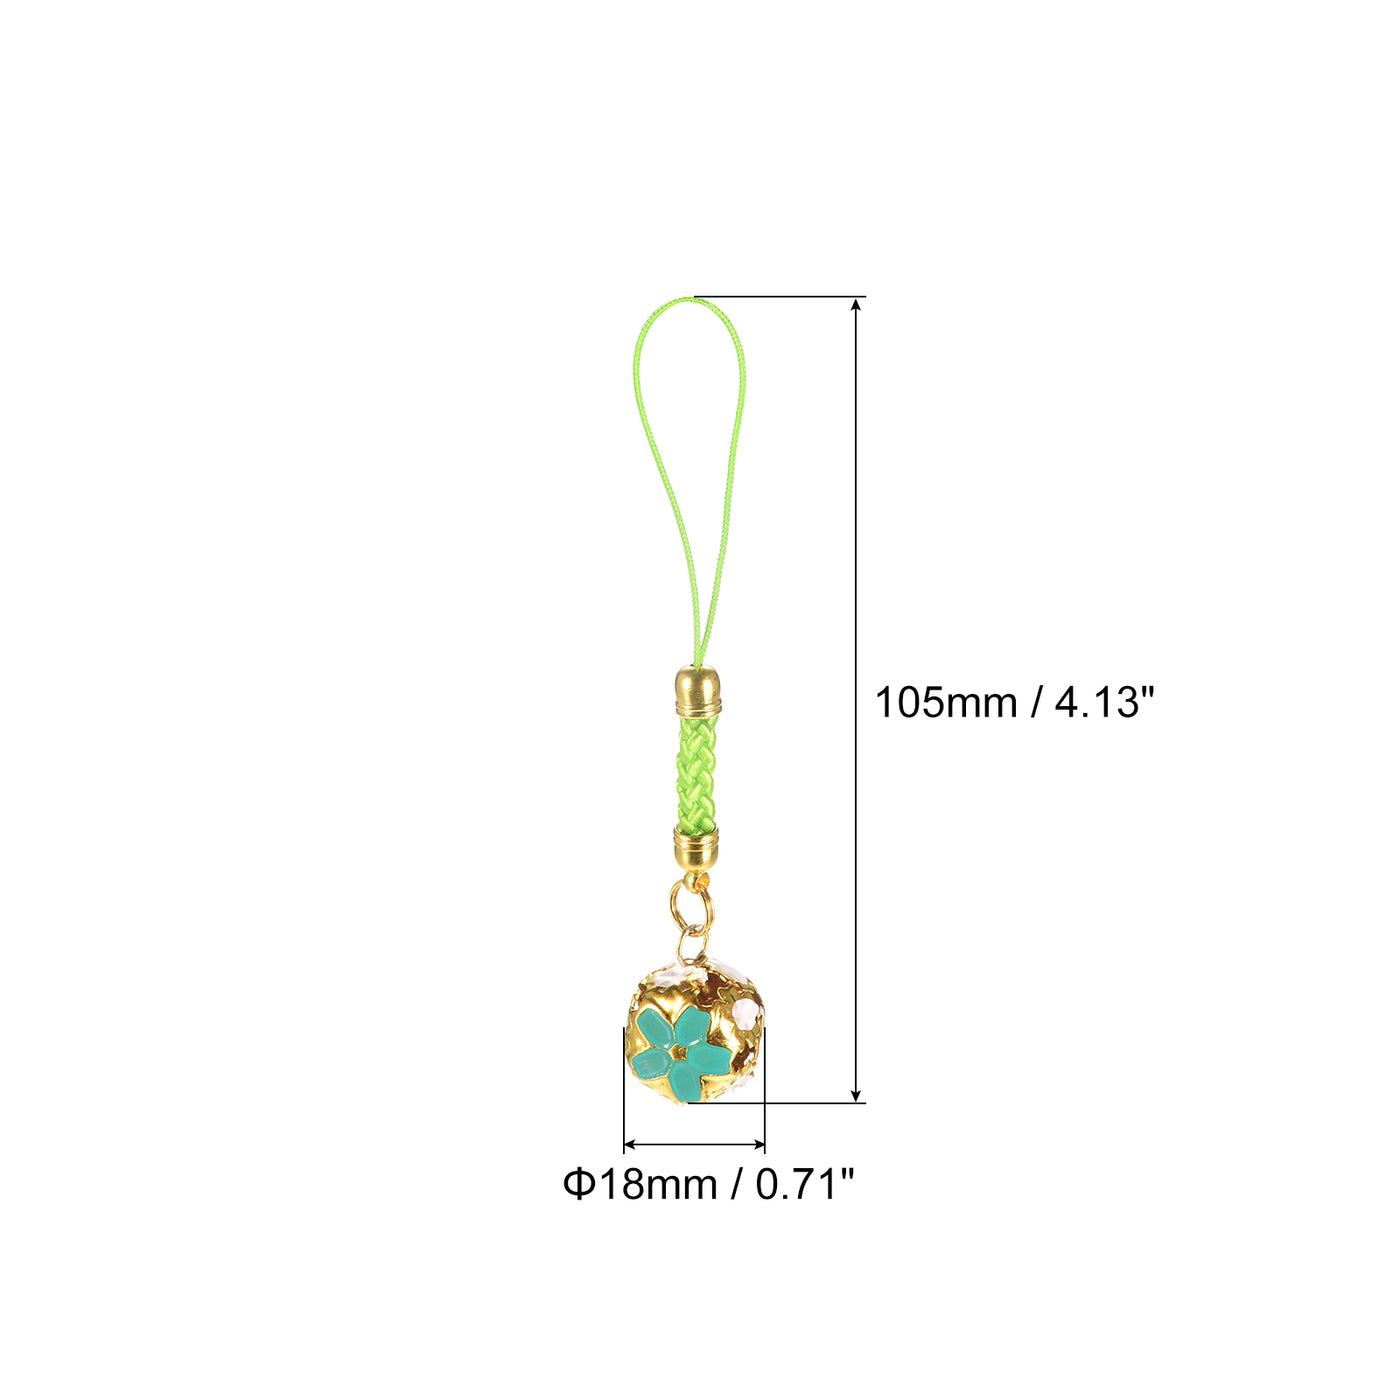 uxcell Uxcell 5Pcs Cellphone Strap Pendant, 10.5cm/0.71" Length Green for DIY Crafts